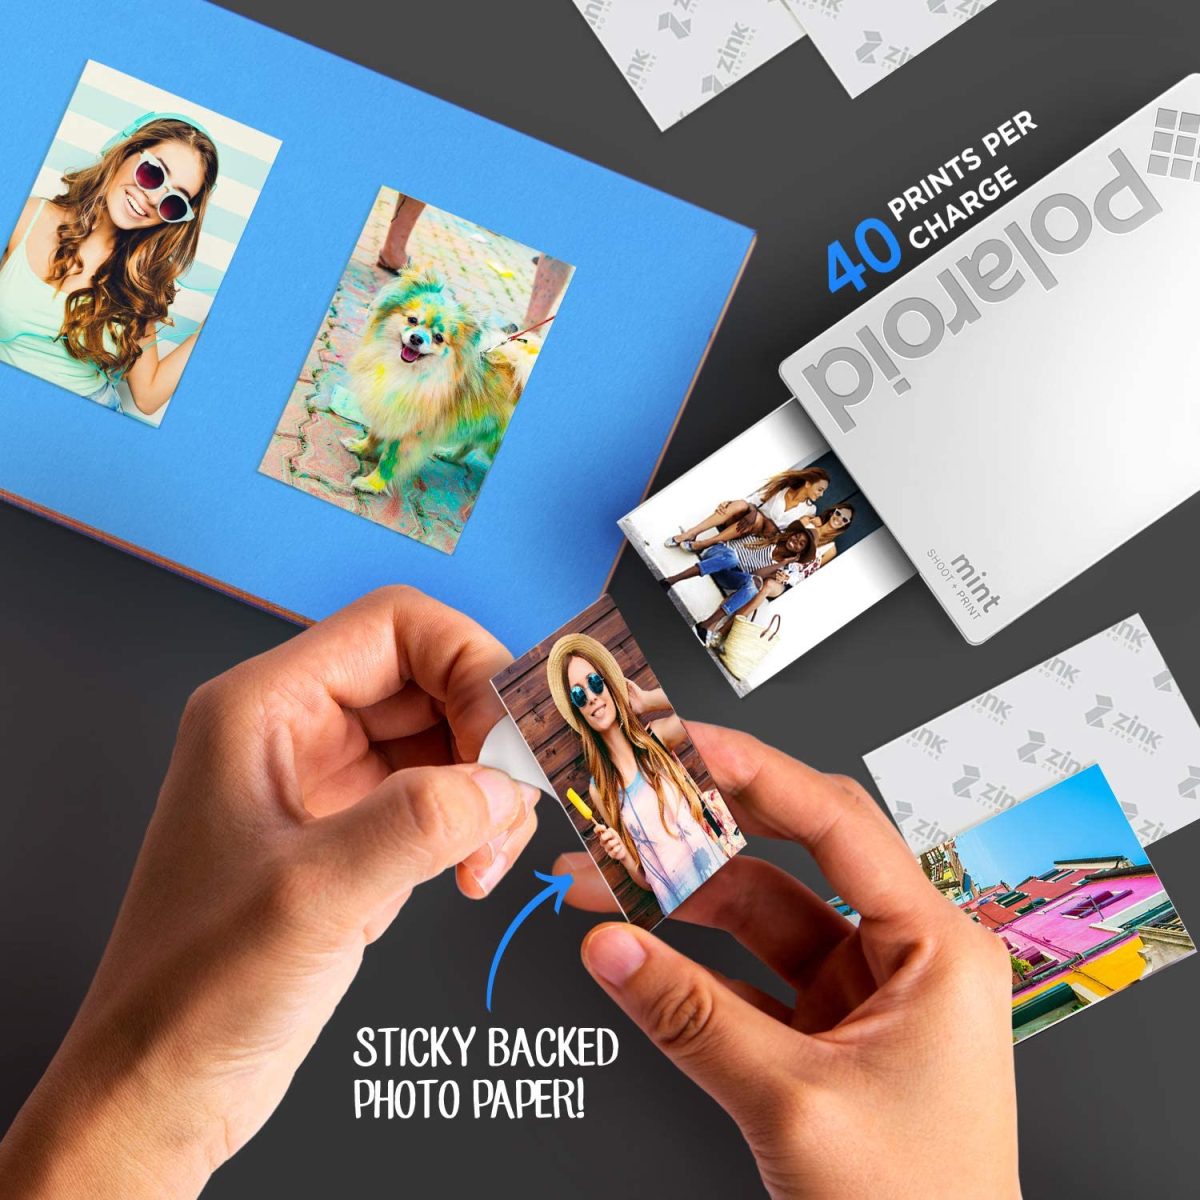 Polaroid Https://Www.youtube.com/Watch?V=Oqivlsmvng8 &Lt;Div Id=&Quot;Featurebullets_Feature_Div&Quot; Class=&Quot;Celwidget&Quot; Data-Feature-Name=&Quot;Featurebullets&Quot; Data-Cel-Widget=&Quot;Featurebullets_Feature_Div&Quot;&Gt; &Lt;Div Id=&Quot;Feature-Bullets&Quot; Class=&Quot;A-Section A-Spacing-Medium A-Spacing-Top-Small&Quot;&Gt; &Lt;Ul Class=&Quot;A-Unordered-List A-Vertical A-Spacing-Mini&Quot;&Gt; &Lt;Li&Gt;&Lt;Span Class=&Quot;A-List-Item&Quot;&Gt;Awesome Handheld Device Lets You Take 16 Megapixel Photographs &Amp; Print Instantly On 2X3 Inches Sticky Back Paper&Lt;/Span&Gt;&Lt;/Li&Gt; &Lt;Li&Gt;&Lt;Span Class=&Quot;A-List-Item&Quot;&Gt;Innovative Zero Ink Technology : There’s No Need For Pricy Toner; Zink Cartridges Combine Paper &Amp; Ink All; Packs Available In 20, 30 Or 50 Sheets&Lt;/Span&Gt;&Lt;/Li&Gt; &Lt;Li&Gt;&Lt;Span Class=&Quot;A-List-Item&Quot;&Gt;Unique Vertical Orientation : Modern Design Lets You Snap Upright, Just Like A Smartphone&Lt;/Span&Gt;&Lt;/Li&Gt; &Lt;Li&Gt;&Lt;Span Class=&Quot;A-List-Item&Quot;&Gt;A Mode For Every Mood : Simple Operation &Amp; Design Includes [6] Easy Picture Settings; Choose From Vibrant Color, Black &Amp; White Or Vintage Effect&Lt;/Span&Gt;&Lt;/Li&Gt; &Lt;Li&Gt;&Lt;Span Class=&Quot;A-List-Item&Quot;&Gt;Fashion Forward &Amp; Travel Friendly : Pick From [5] Fabulously Vibrant Colors; Pocket Sized Camera Measures 4. 6 X 3. 1 X 0. 8 Inches &Amp; Weighs Only 6 Ounces&Lt;/Span&Gt;&Lt;/Li&Gt; &Lt;Li&Gt;&Lt;Span Class=&Quot;A-List-Item&Quot;&Gt;Viewfinder Type: Optical&Lt;/Span&Gt;&Lt;/Li&Gt; &Lt;/Ul&Gt; &Lt;/Div&Gt; &Lt;/Div&Gt; Polaroid Mint Instant Print Digital Camera Polaroid Mint Instant Print Digital Camera -Yellow